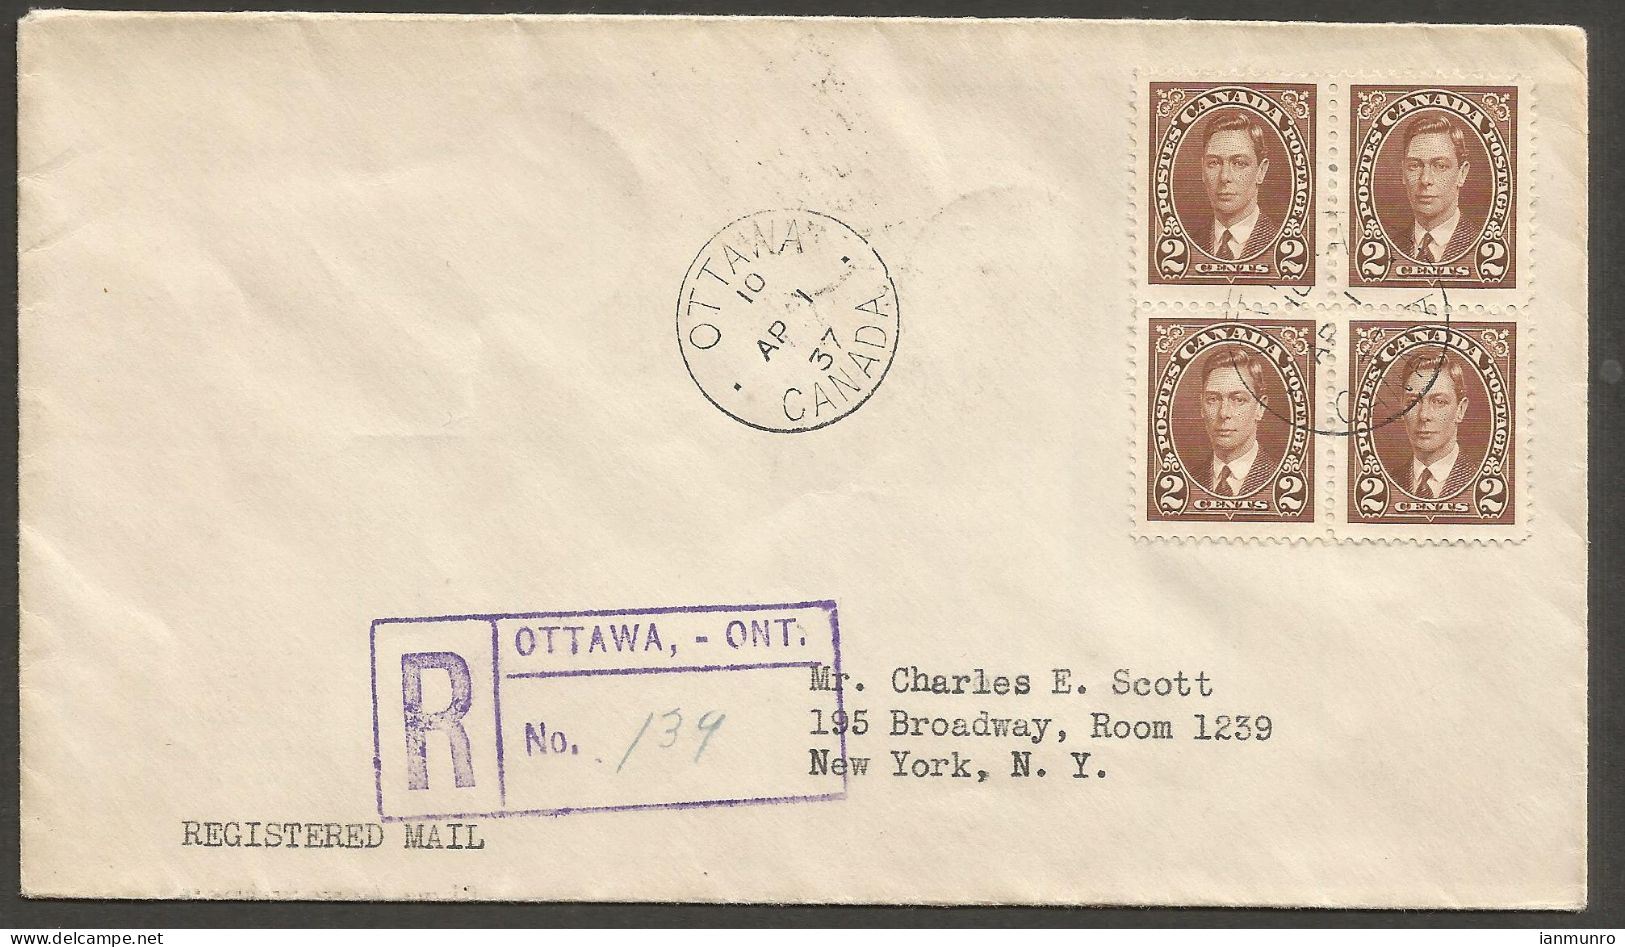 1937 FDC First Day Cover Registered 2c Mufti Block #232 CDS Ottawa Ontario - Postal History